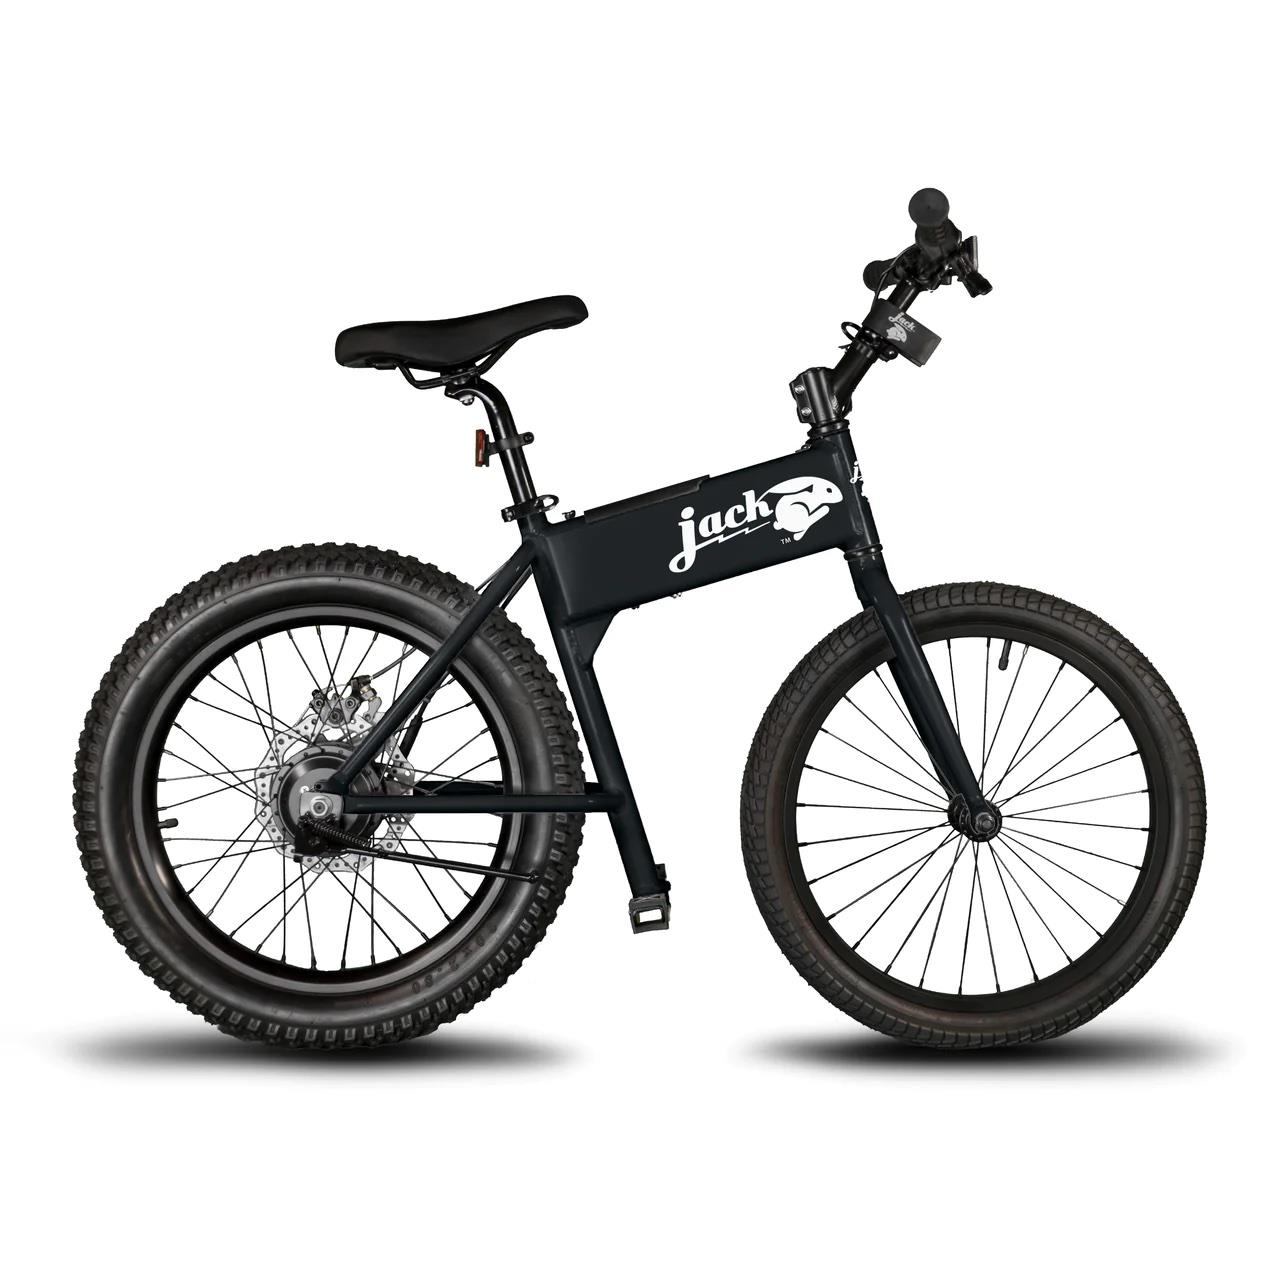 THE ORIGINAL JackRabbit PORTABLE & ULTRALIGHT MICRO EBIKE, BLACK 73 reviews  With a max speed of 20mph and weighing an ultralight 24 lbs, the JackRabbit micro ebike is small, but mighty. Like a chihuahua, but loveable.